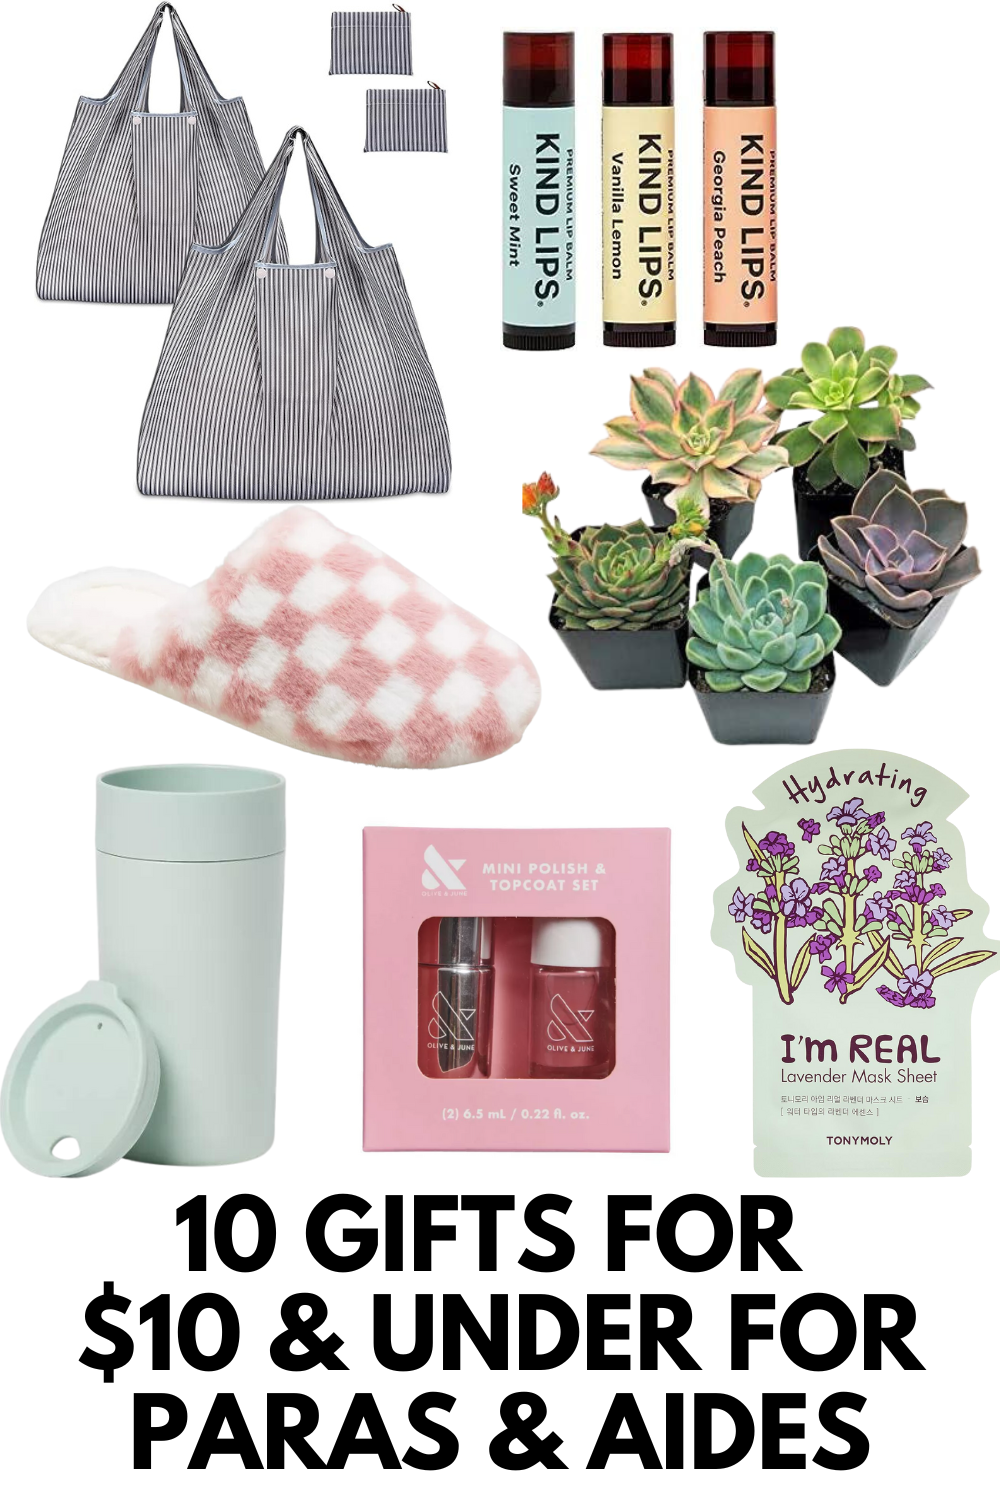 Complete list of $10 (or less) gift ideas for everyone in the family